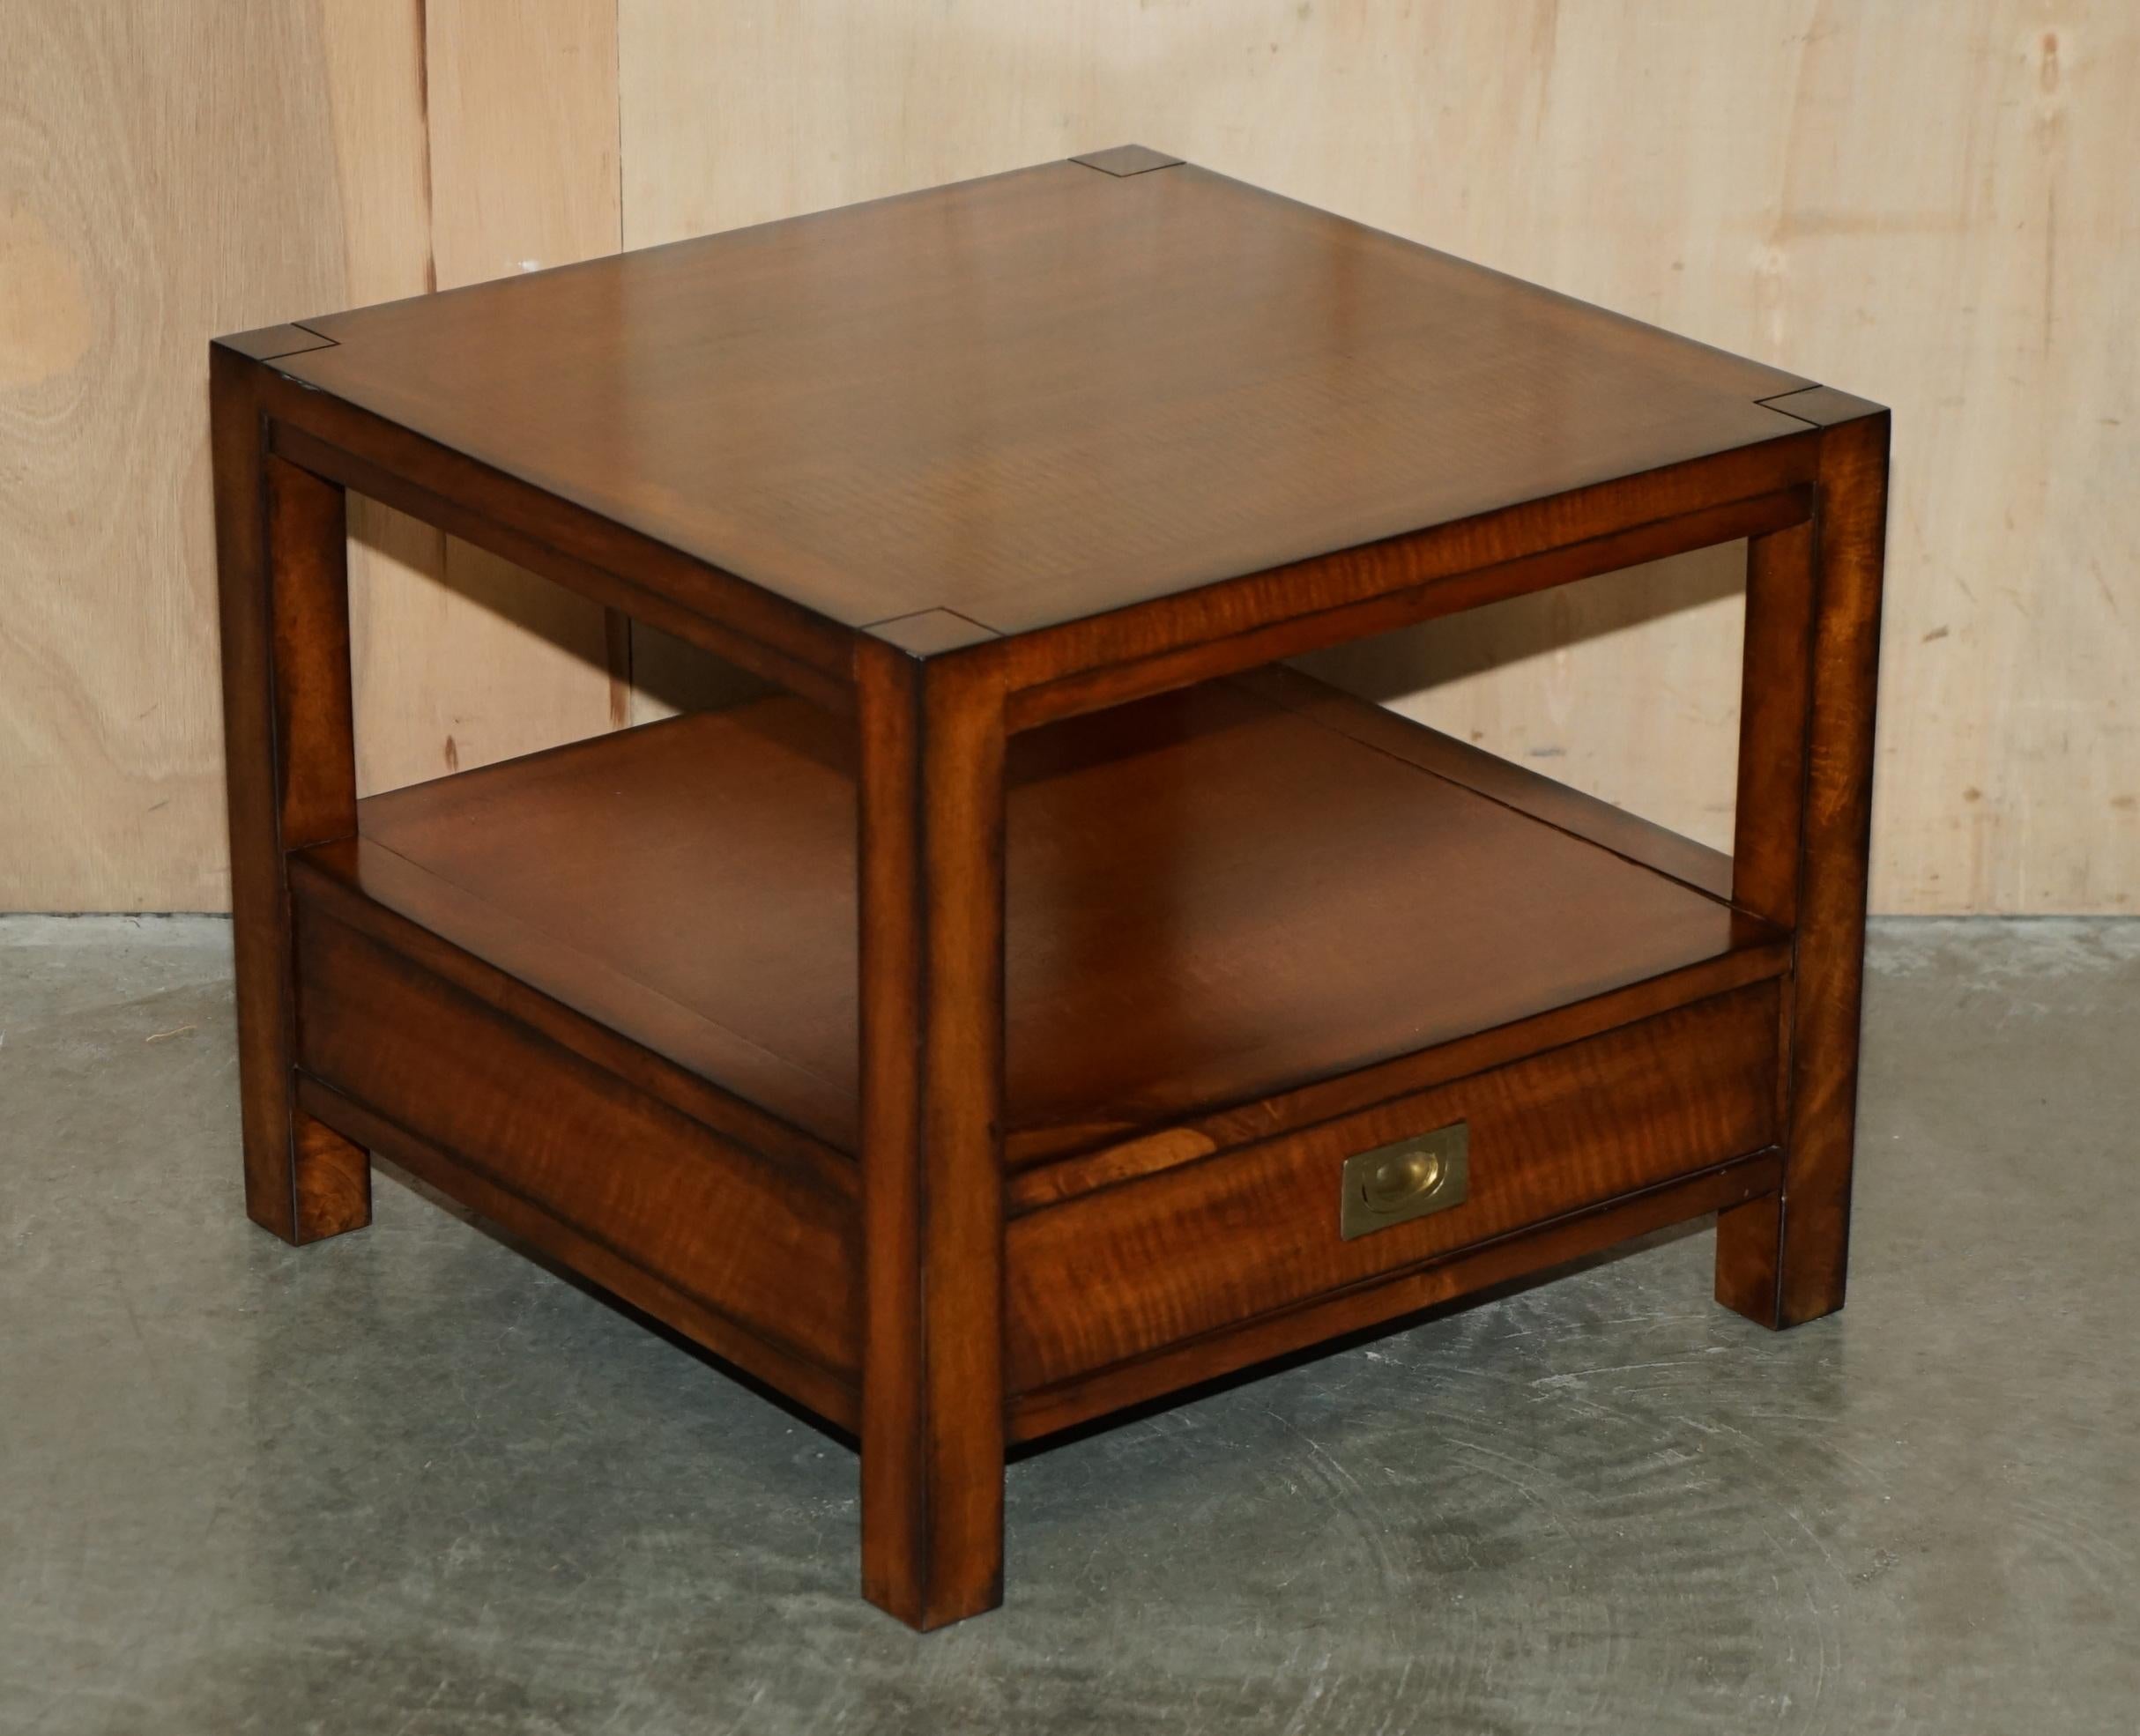 Royal House Antiques

Royal House Antiques is delighted to offer for sale this stunning pair of Military Campaign side tables with full sized single drawers and two tiers 

Please note the delivery fee listed is just a guide, it covers within the